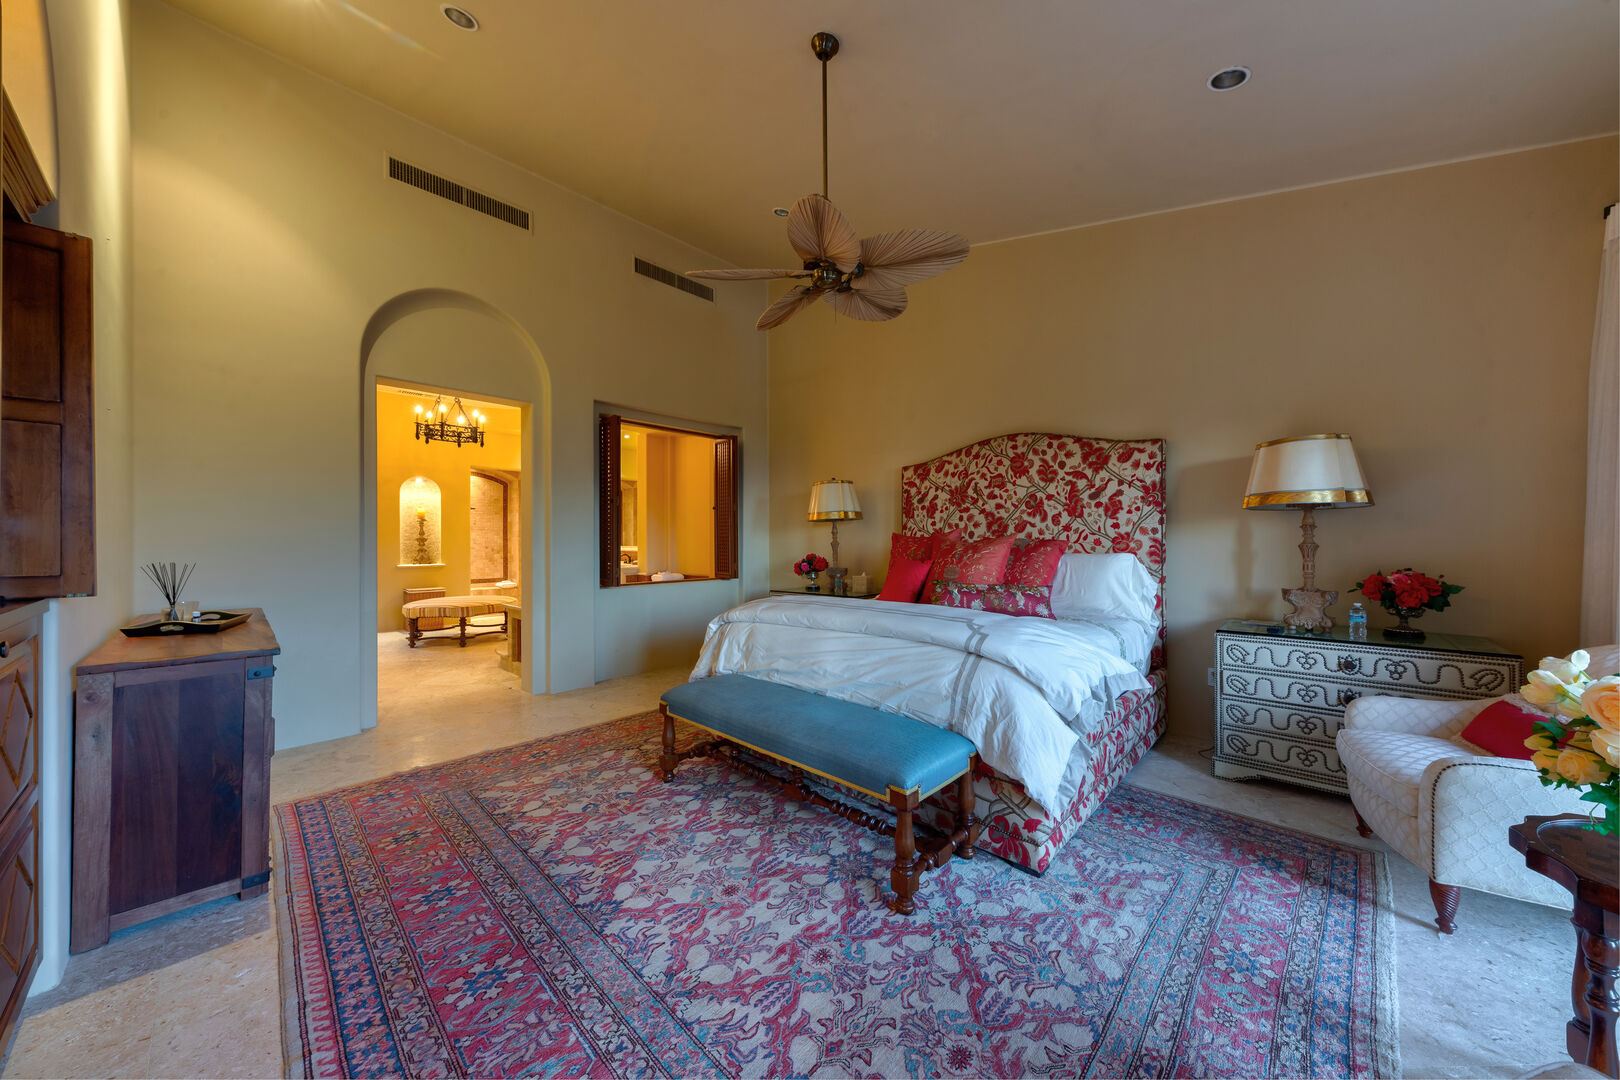 Bedroom with one bed and ceiling fan